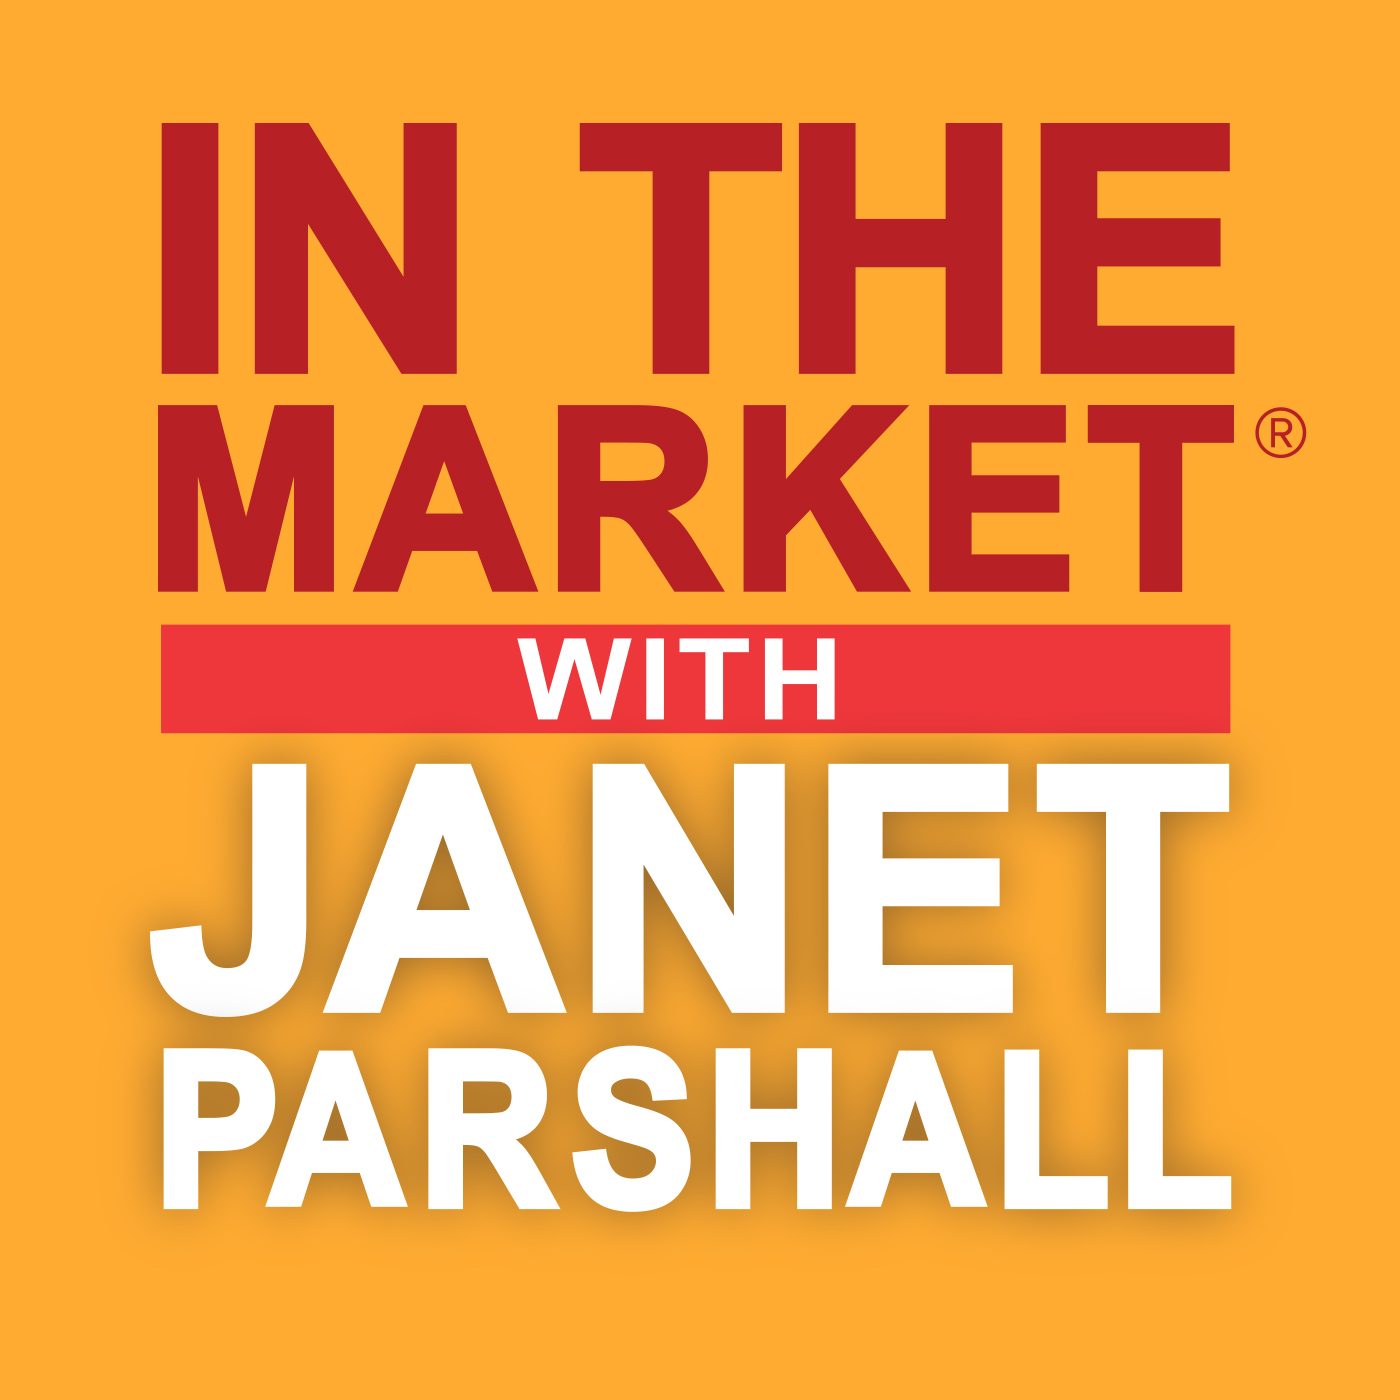 Best of In The Market with Janet Parshall: I Believe